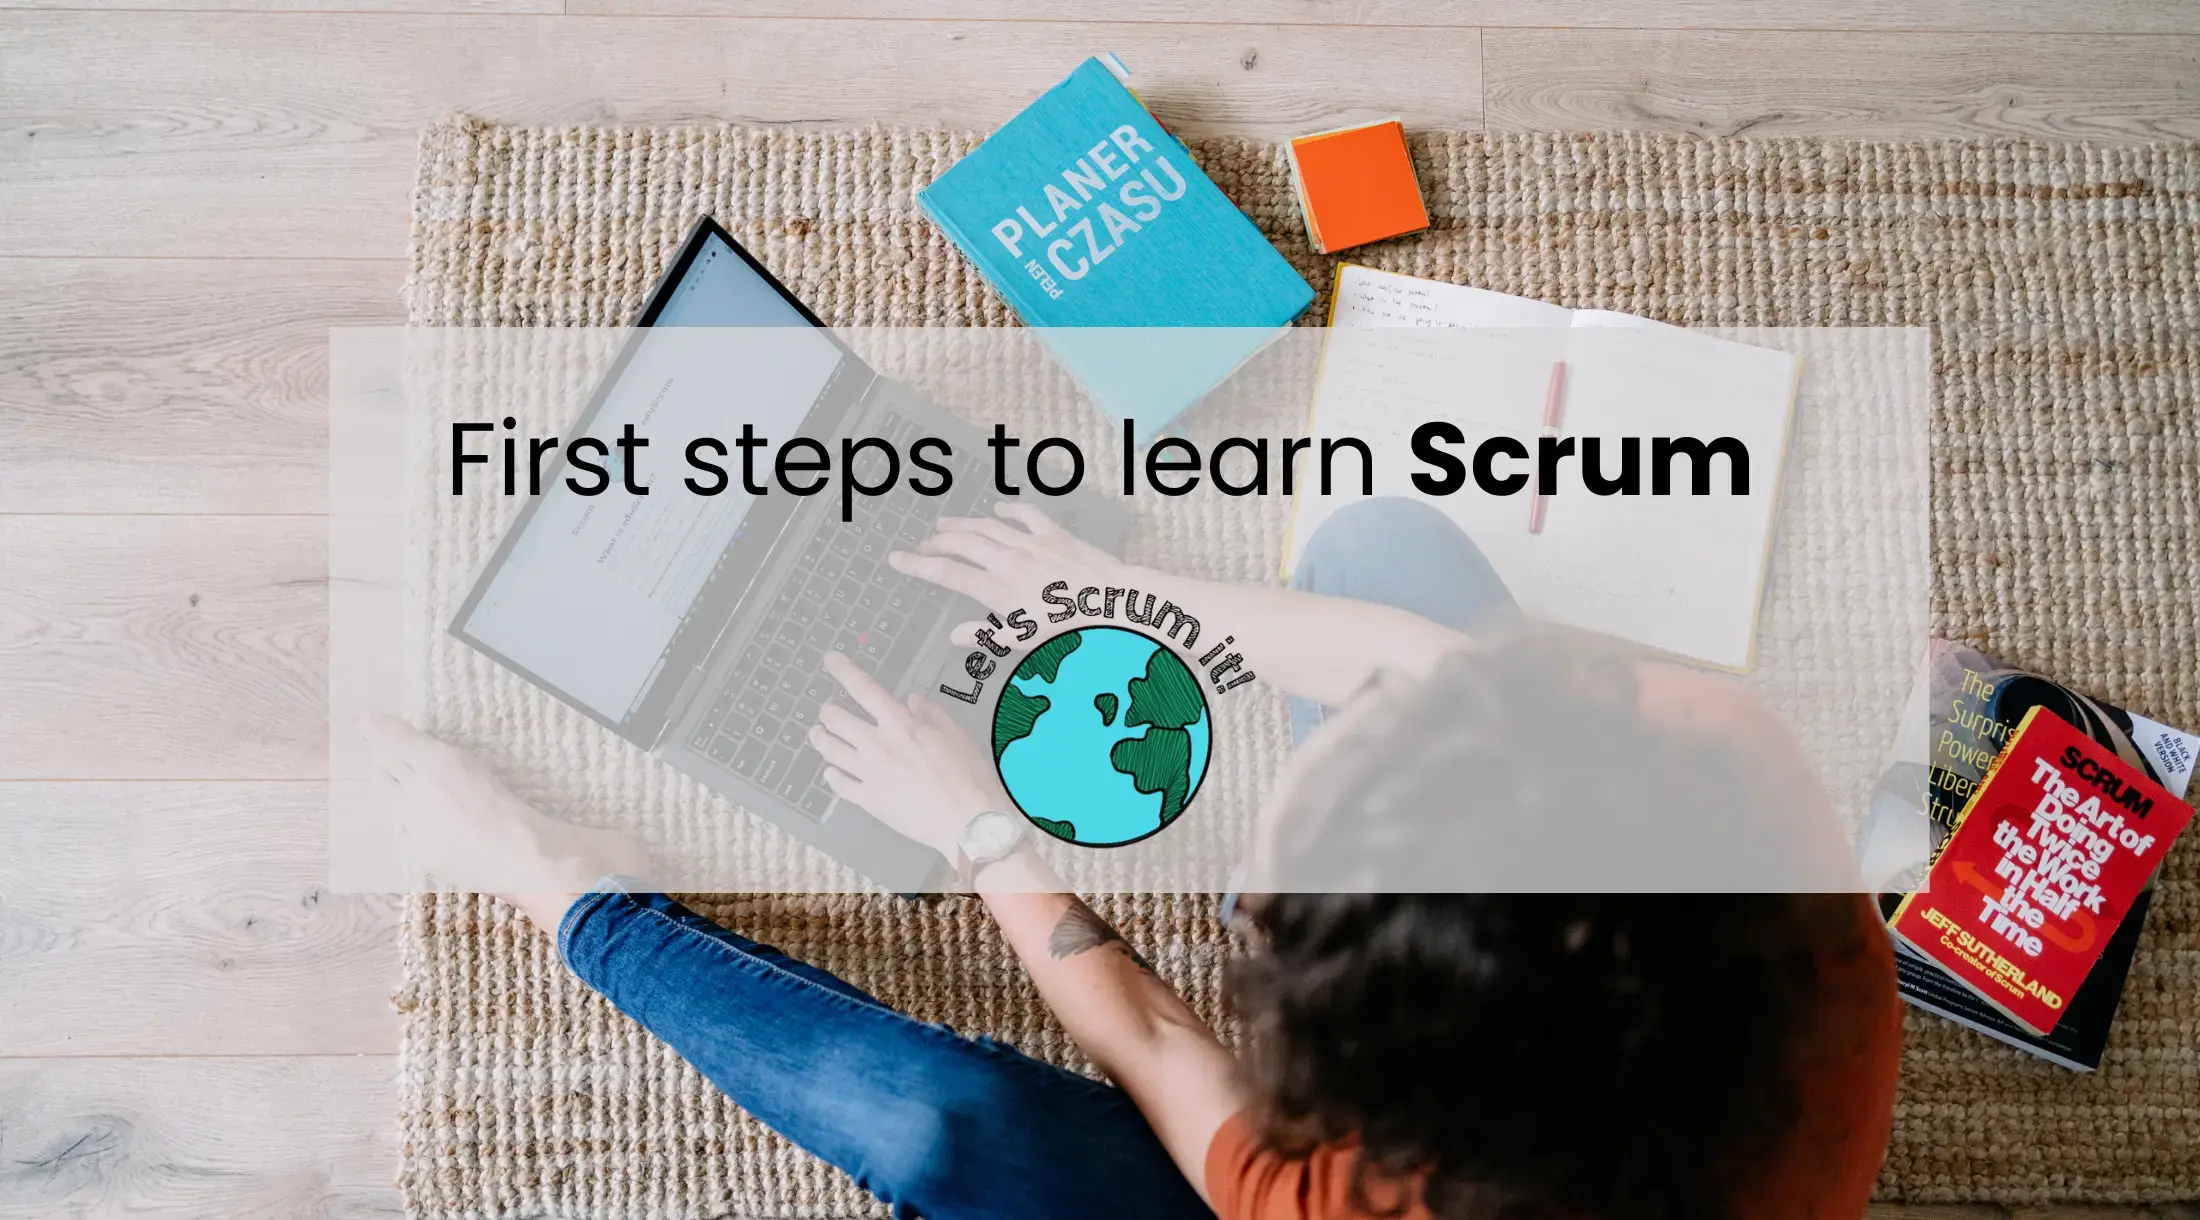 First steps to learn Scrum